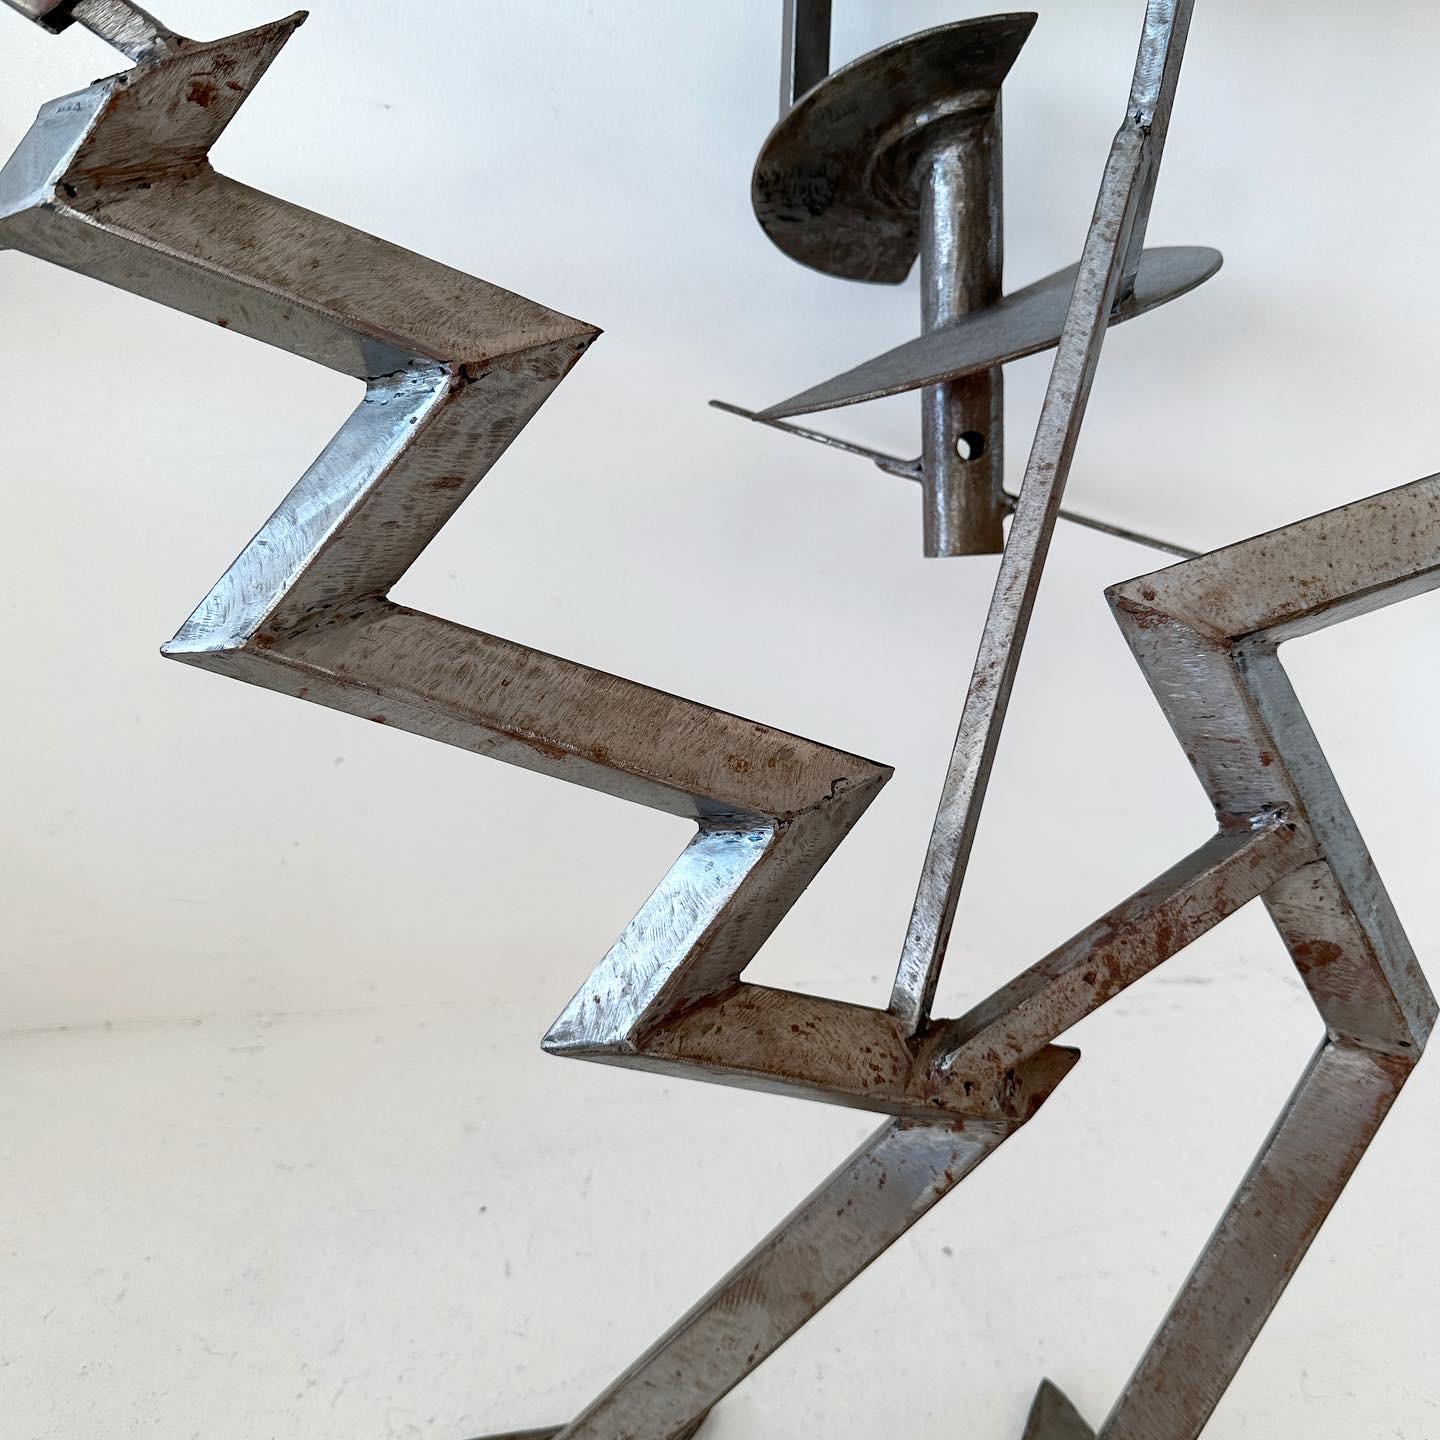 One of a kind welded brushed steel console table with glass top. Cartoonish, playful jagged zig zags alongside shapes that recall boating or aviation e.g. propellers/blades. 

The glass pieces on top are inset and easily removed/changeable. The long